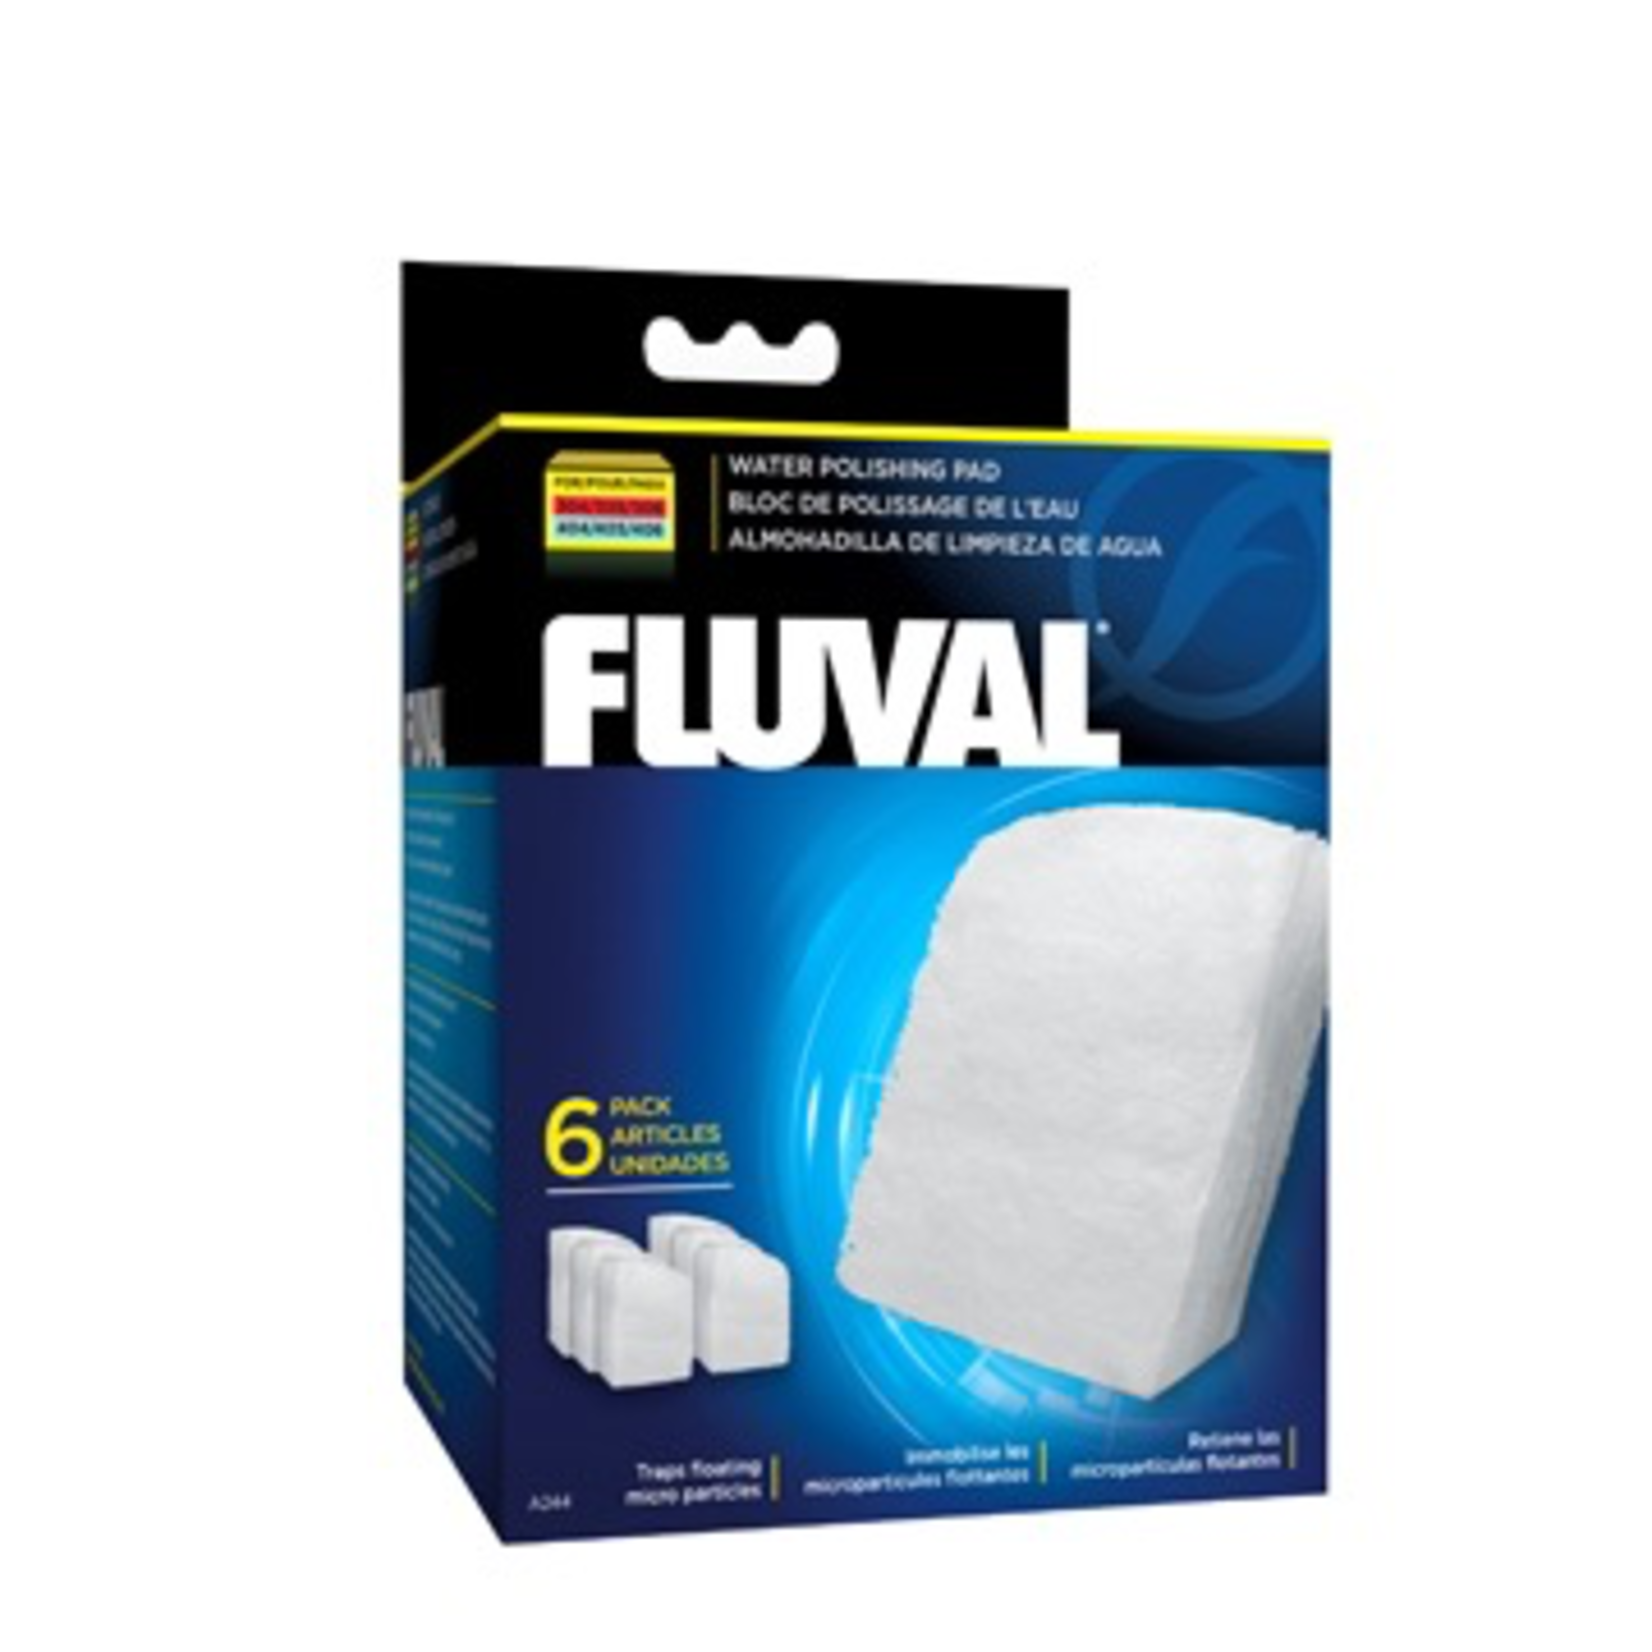 FLUVAL (W) Fluval Polishing Pad for 304/305/306 and 404/405/406 - 6 pieces